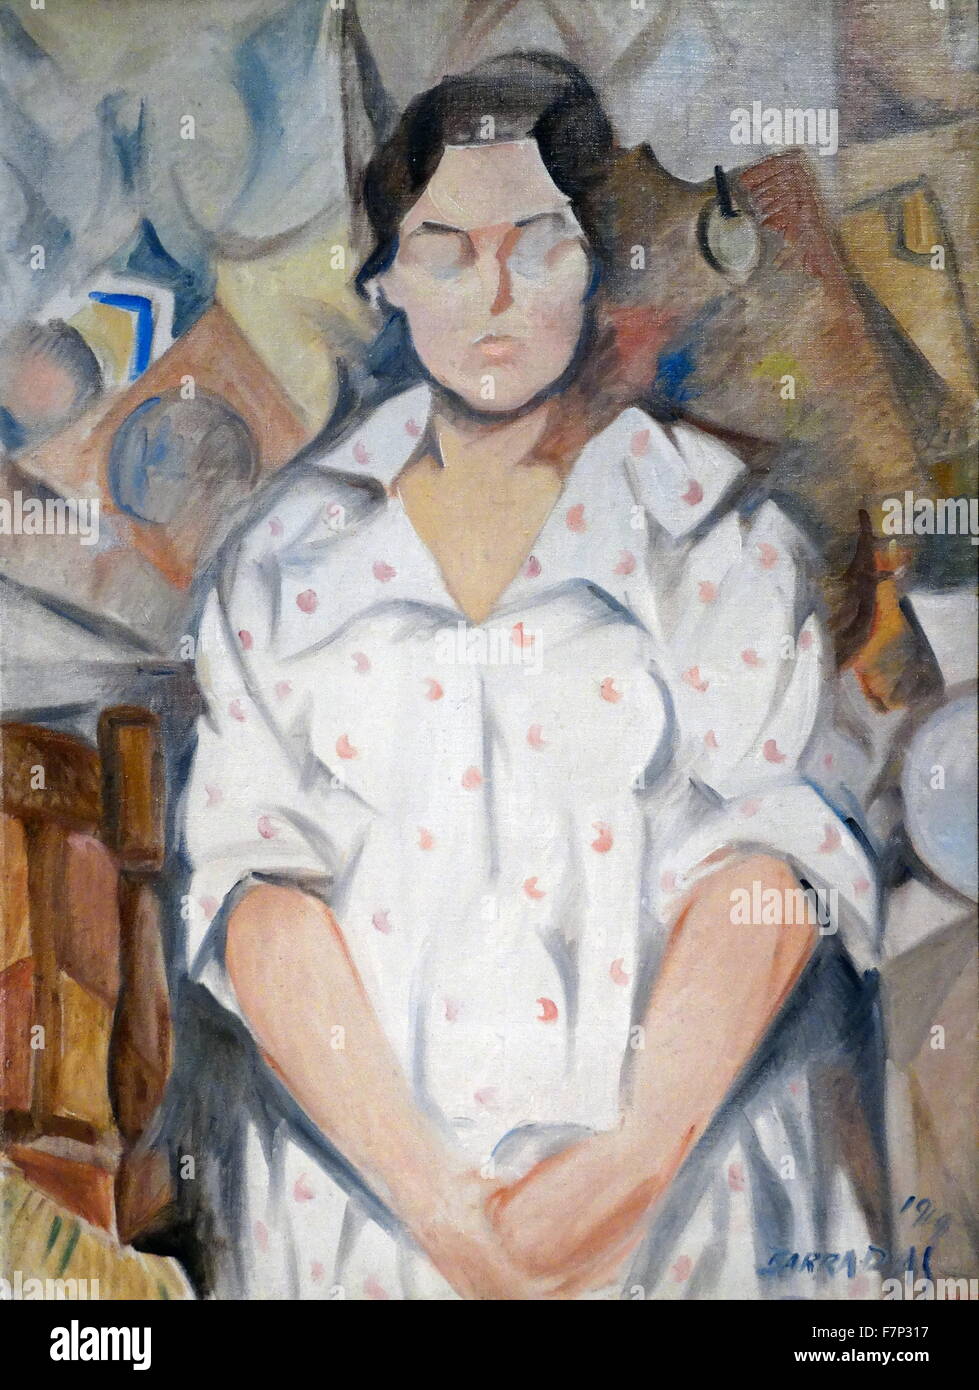 Painting titled 'Portrait of Pilar' by Rafael Barradas (1890-1929) Uruguayan modernist painter and graphic artist. Dated 1919 Stock Photo